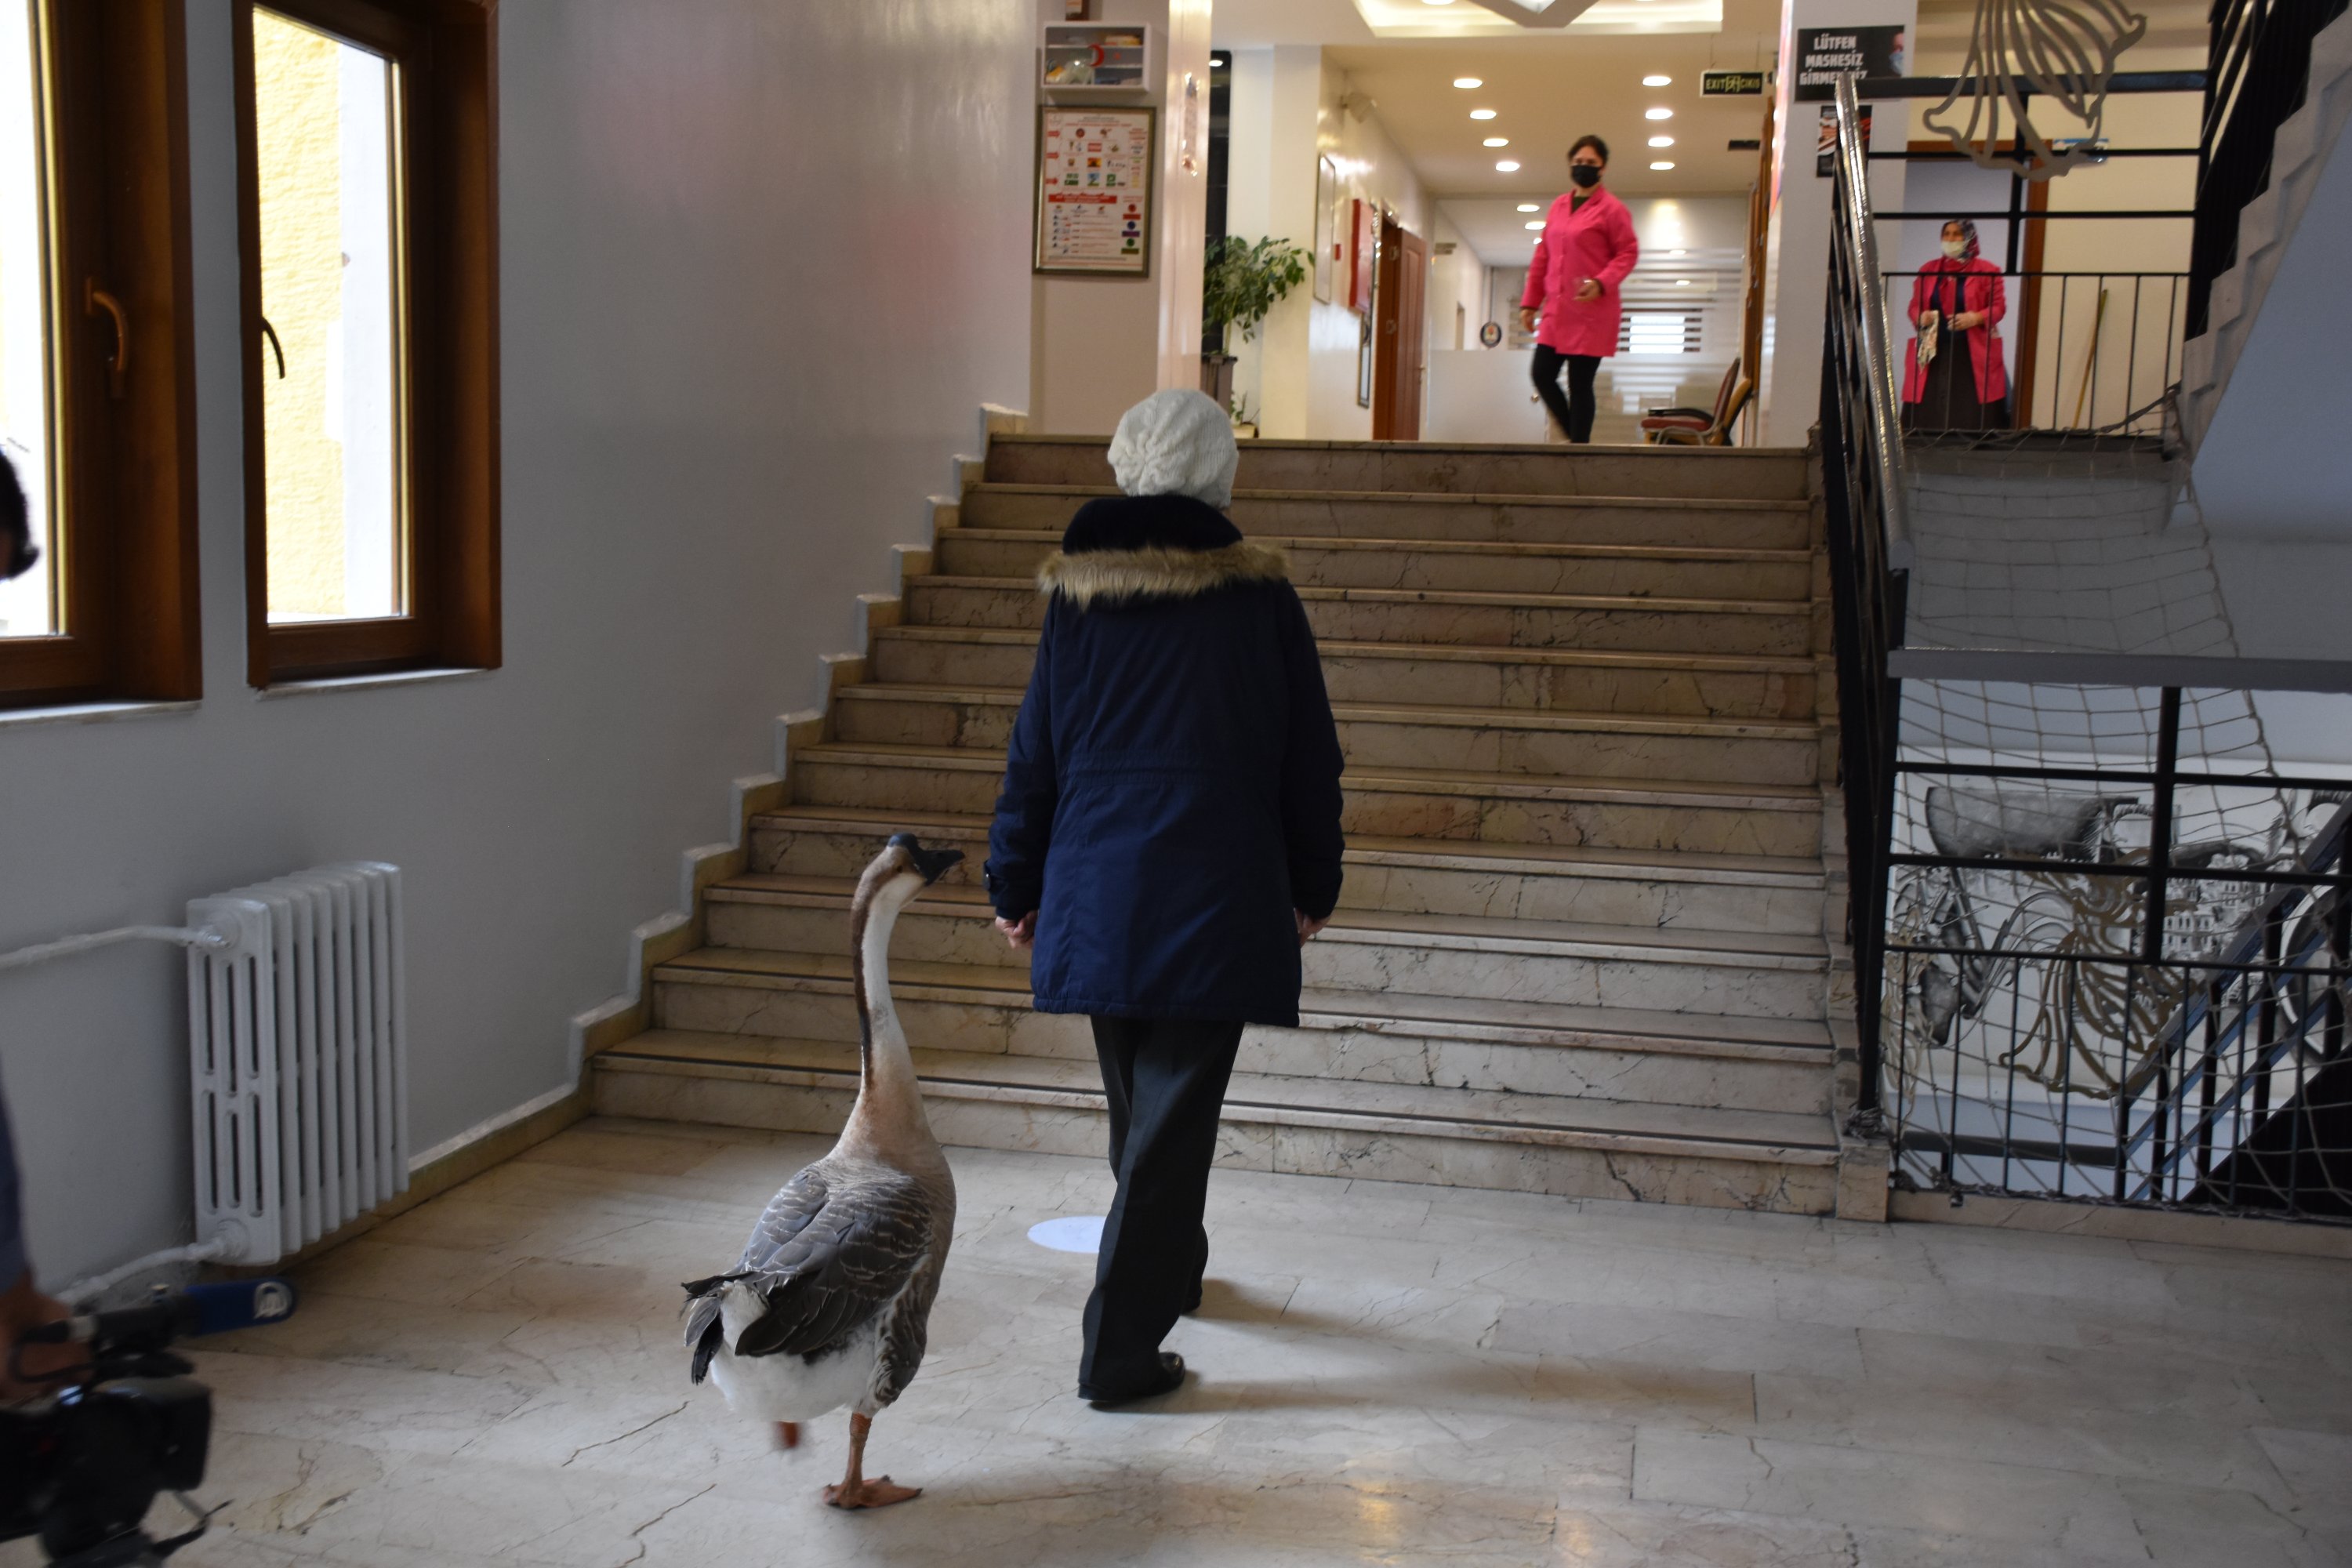 Hatice Özkan walks with her grandson's pet goose Kirli in the halls of a middle school in the Ortahisar district of Trabzon, Turkey, Oct. 15, 2021. (AA Photo)